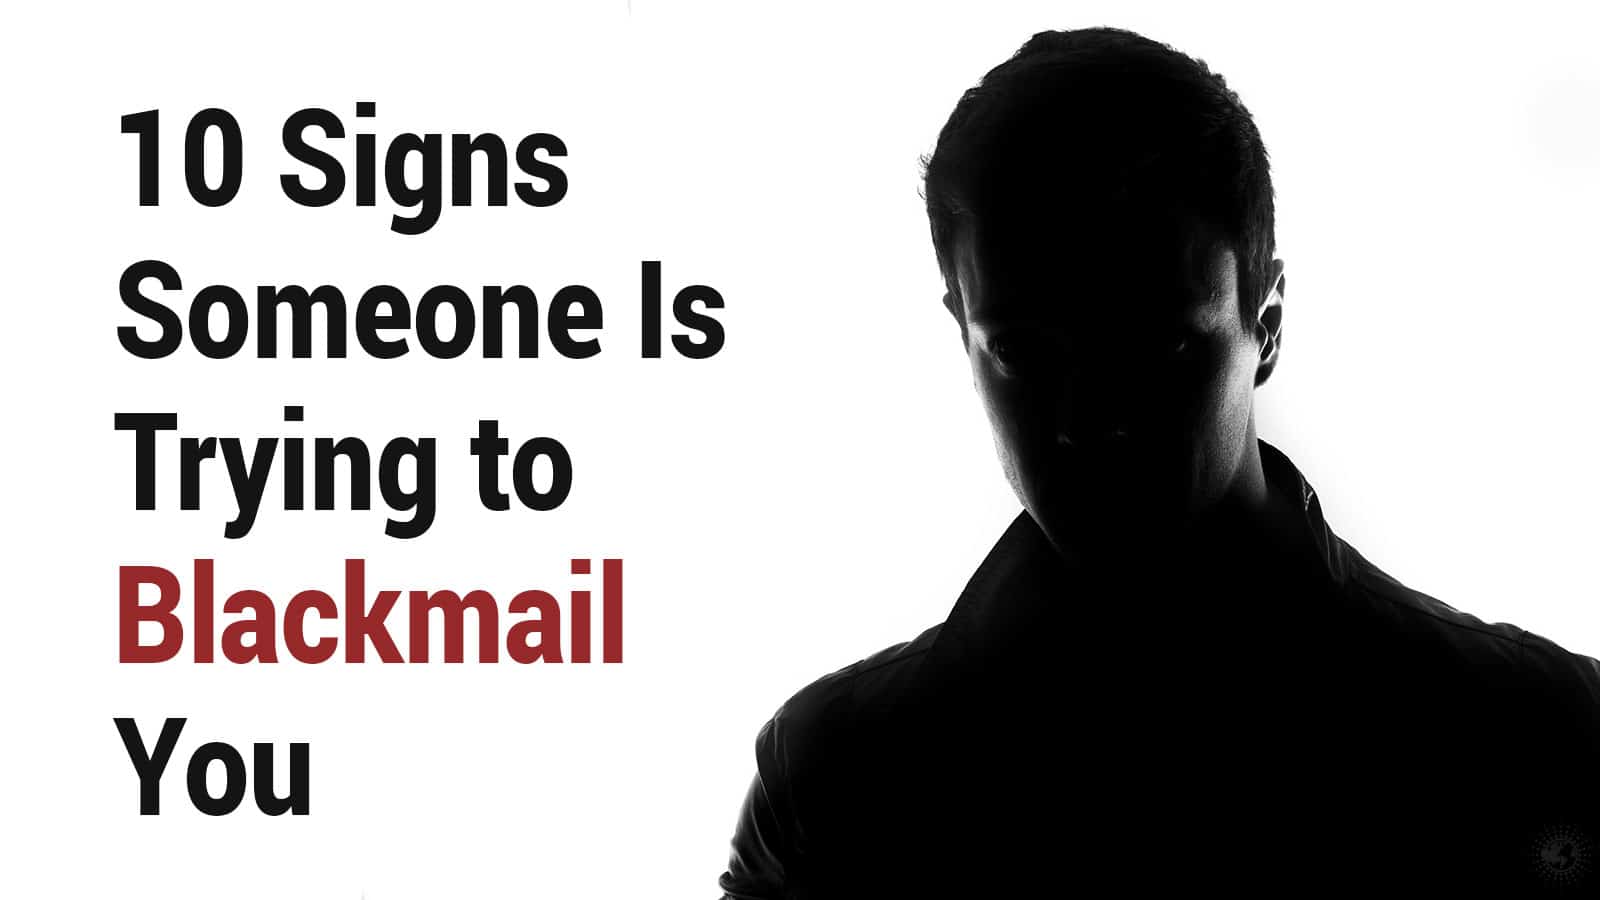 10 Signs Someone Is Trying to Blackmail You